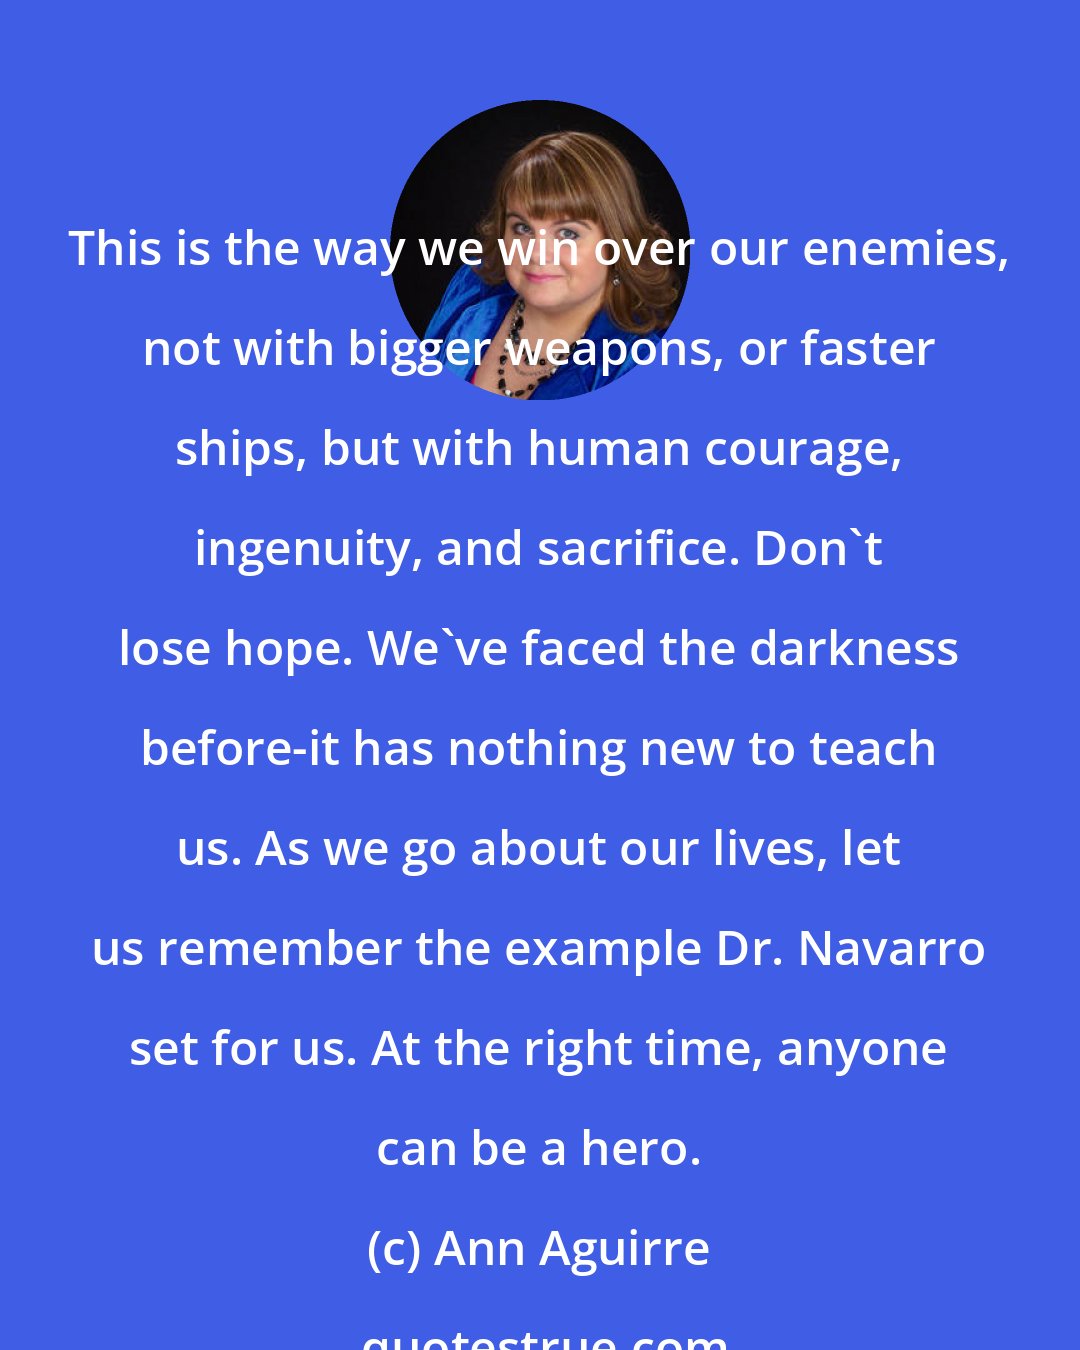 Ann Aguirre: This is the way we win over our enemies, not with bigger weapons, or faster ships, but with human courage, ingenuity, and sacrifice. Don't lose hope. We've faced the darkness before-it has nothing new to teach us. As we go about our lives, let us remember the example Dr. Navarro set for us. At the right time, anyone can be a hero.